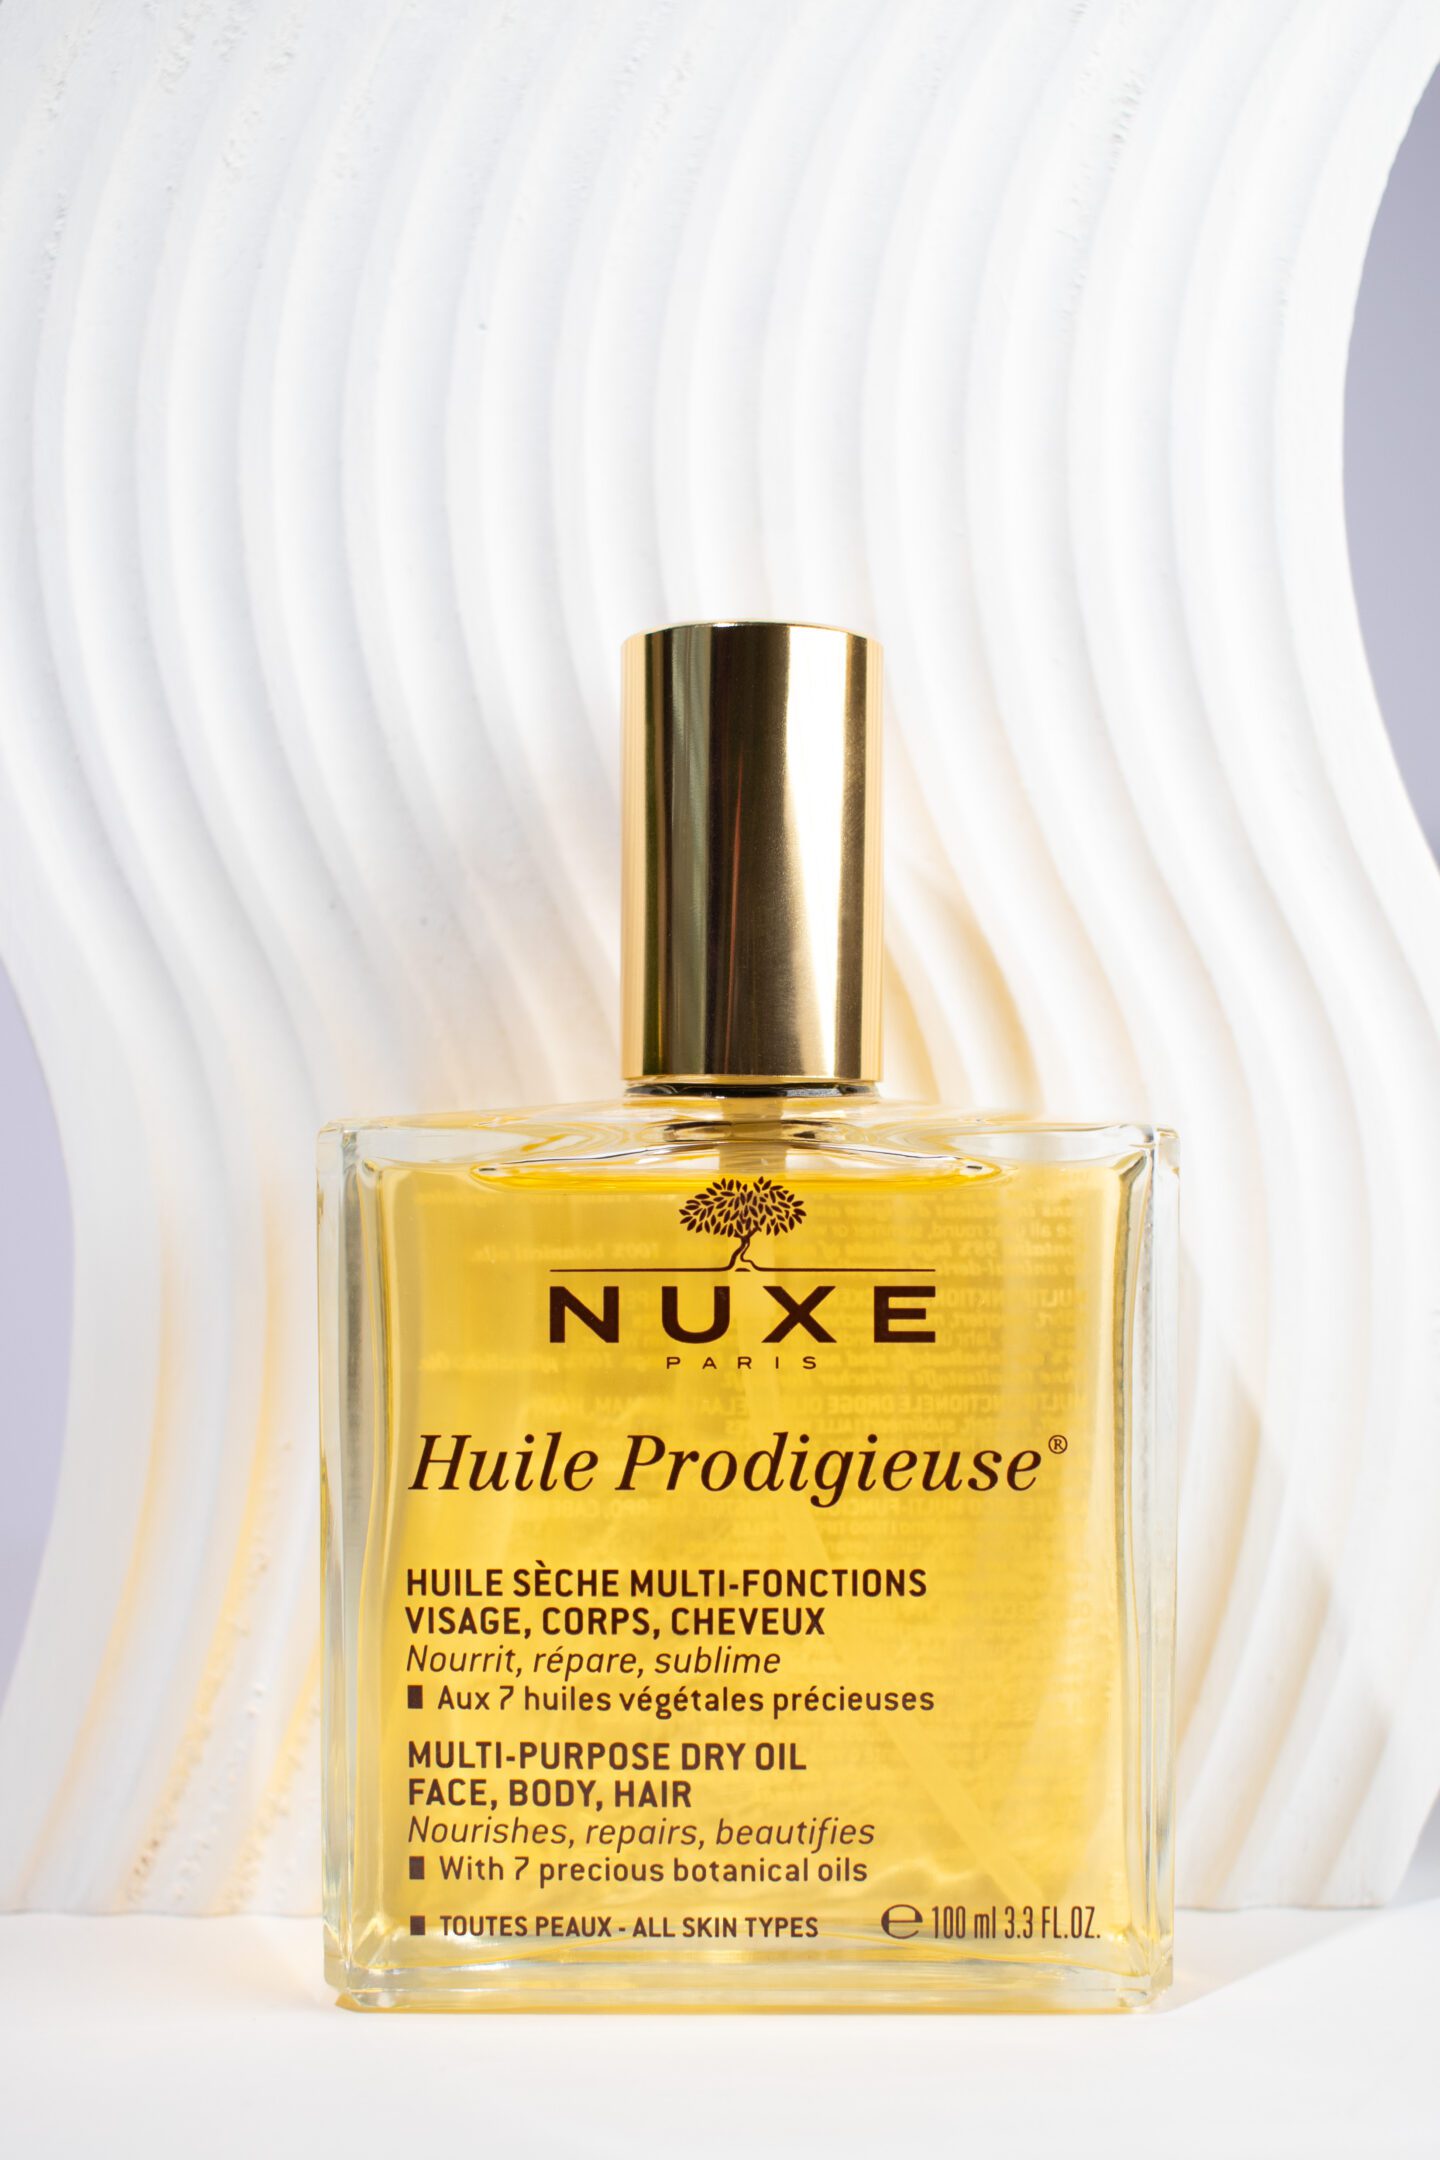 How to use Nuxe Huile Prodigieuse